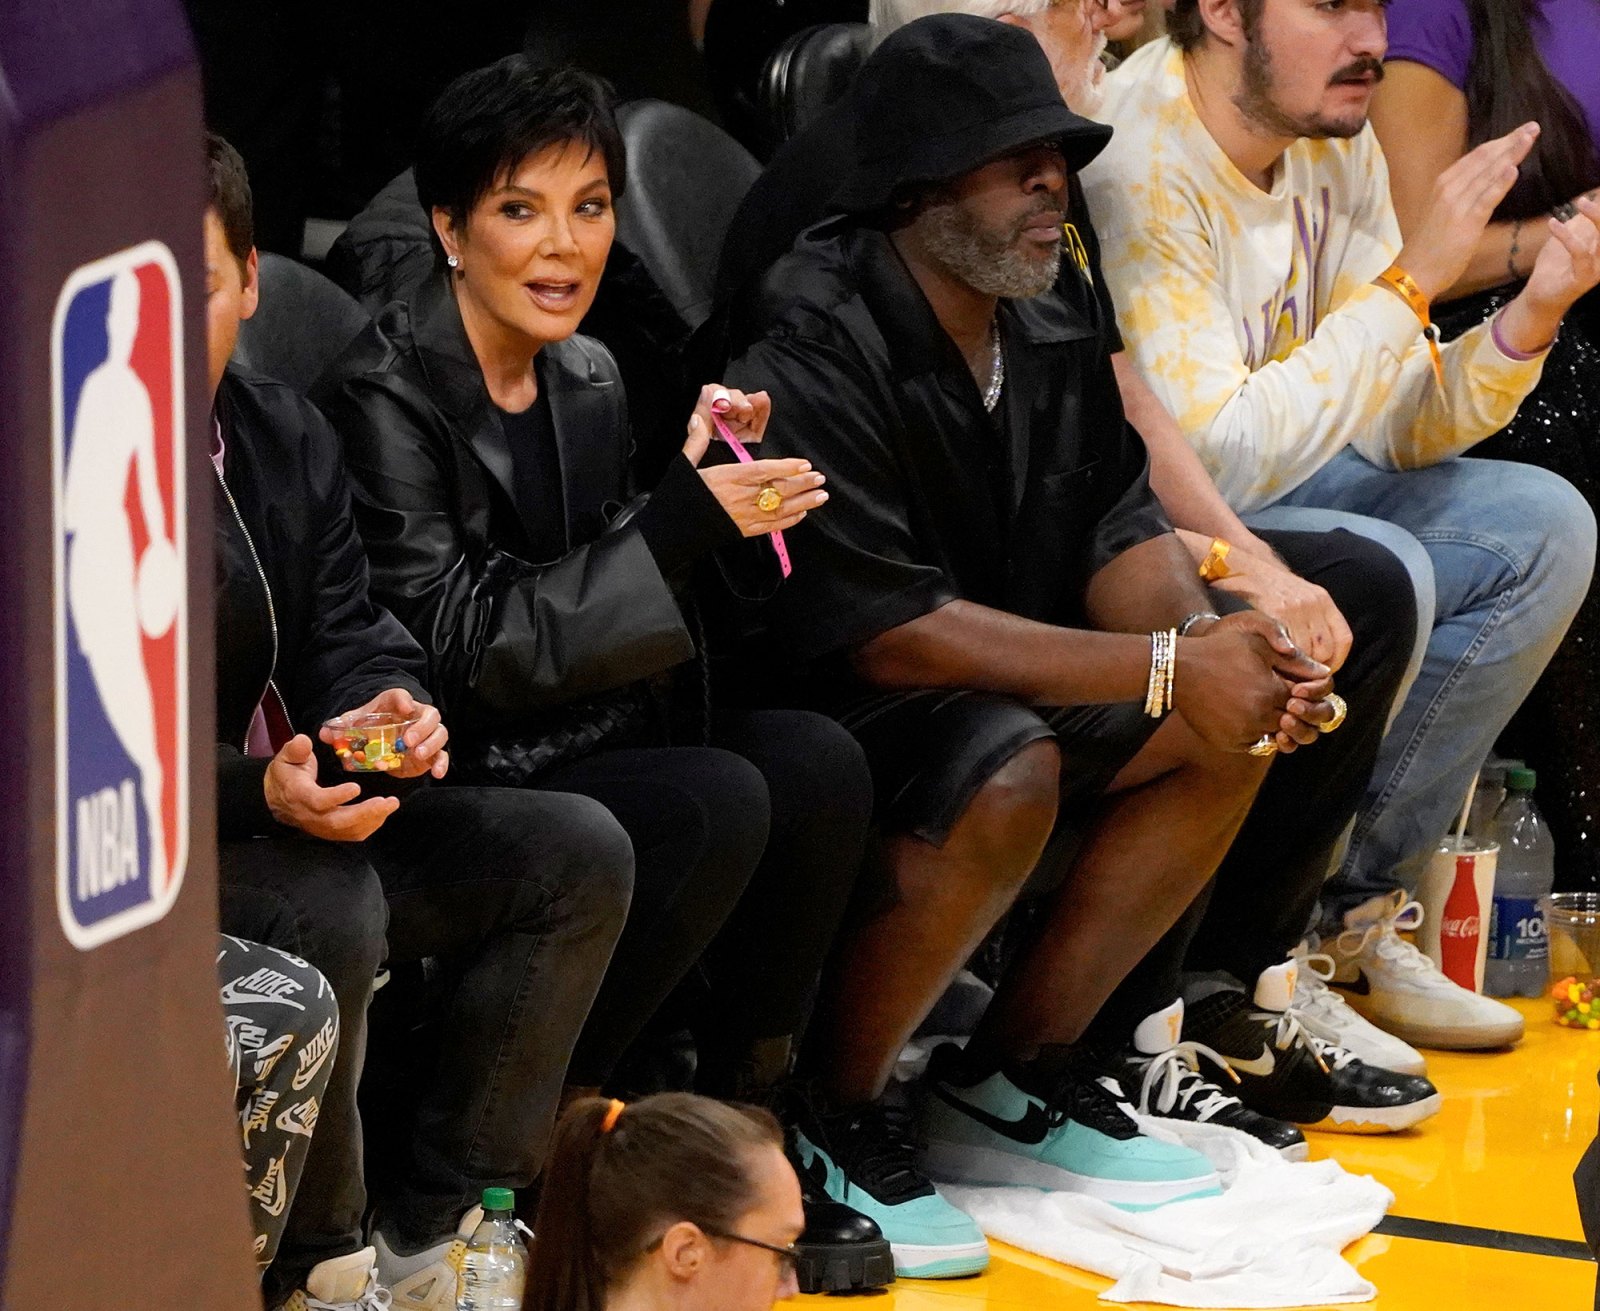 Feature Kris Jenner and Corey Gamble Support Tristan Thompson at Lakers Game